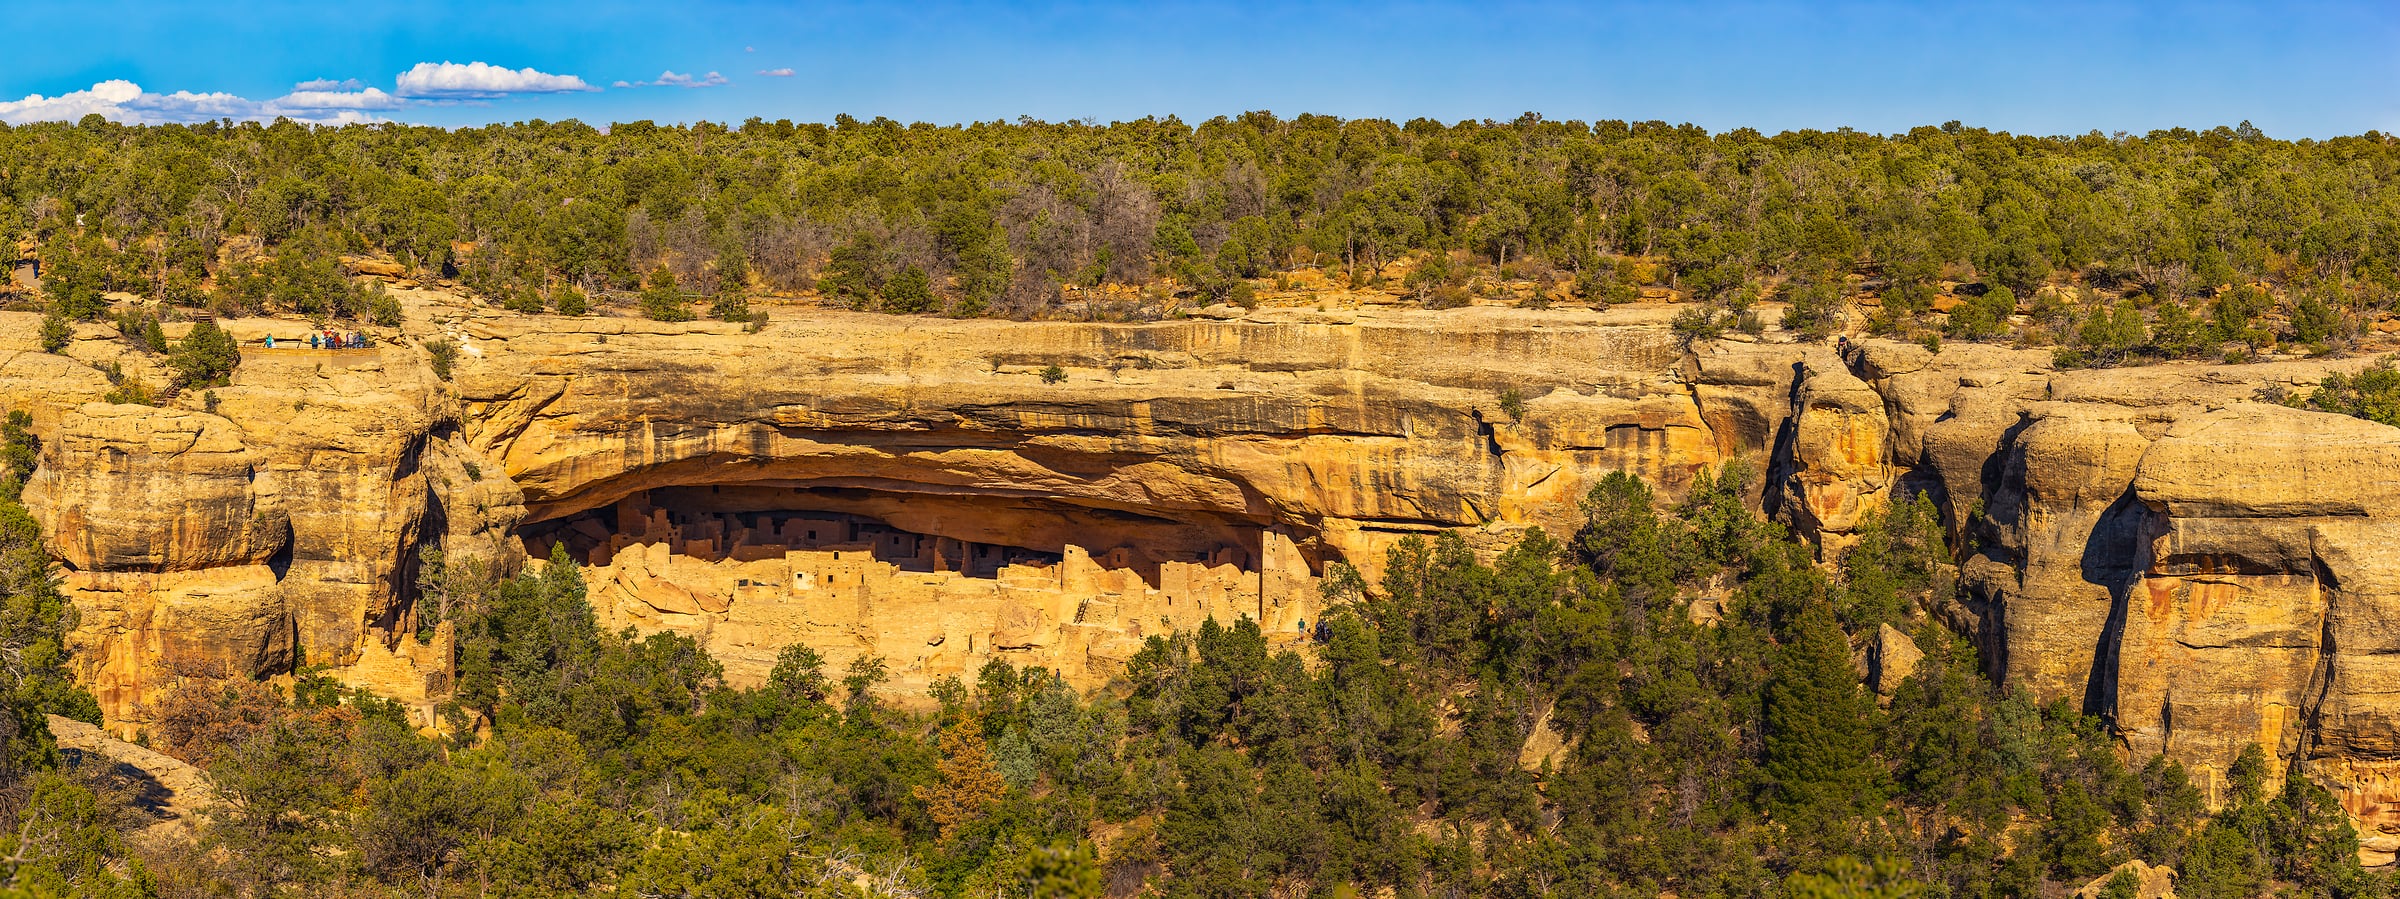 2,771 megapixels! A very high resolution, panorama photo of Native American dwellings in a cliffside; archeological photograph created by John Freeman in from Sun Temple Overlook in Mesa Verde National Park, Colorado.